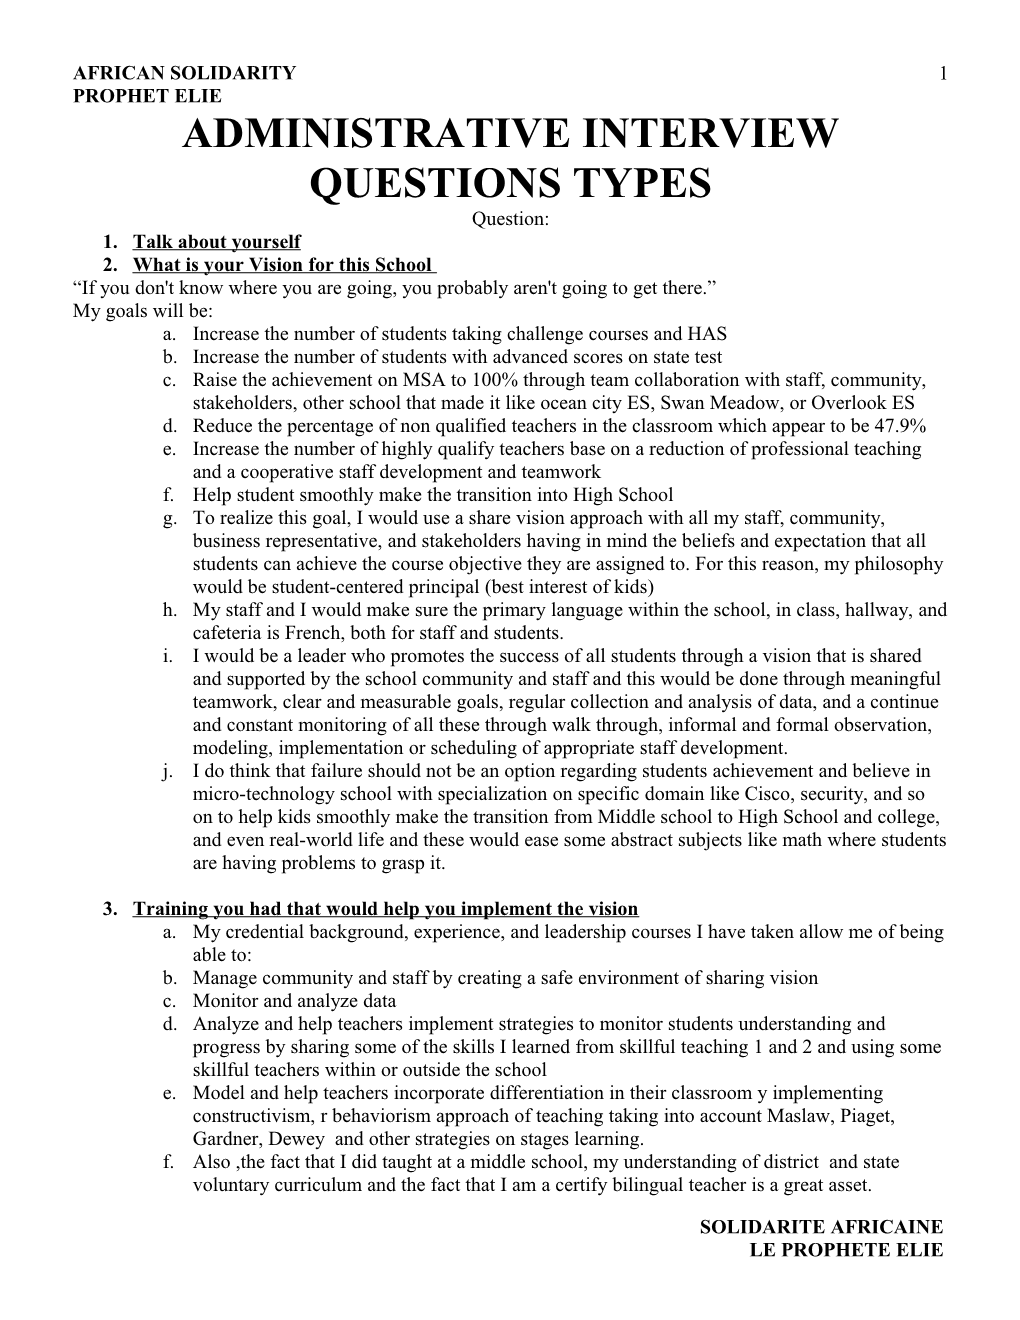 Administrative Interview Questions Types